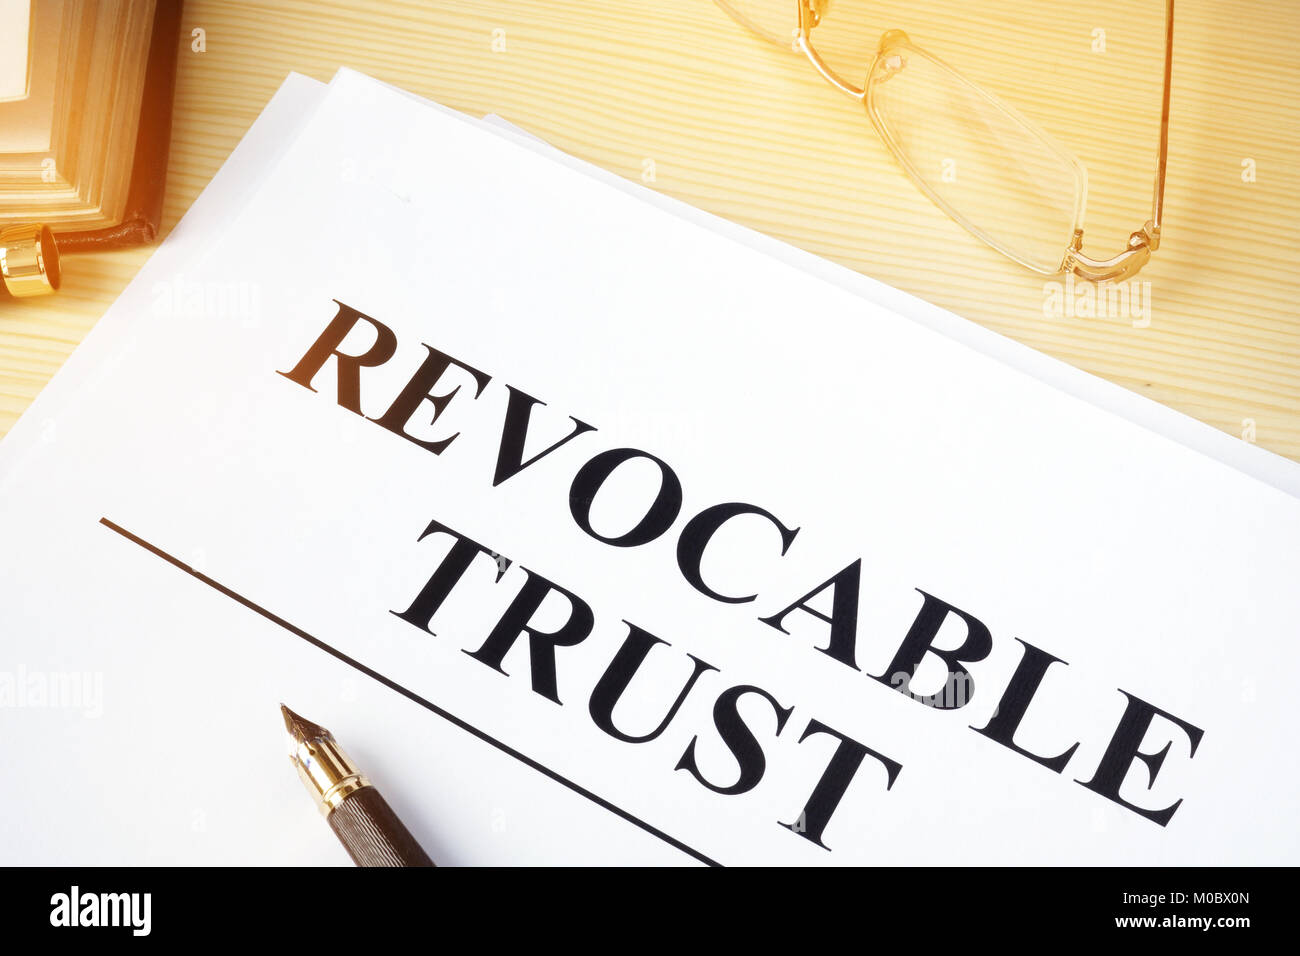 Revocable trust on a wooden desk. Stock Photo